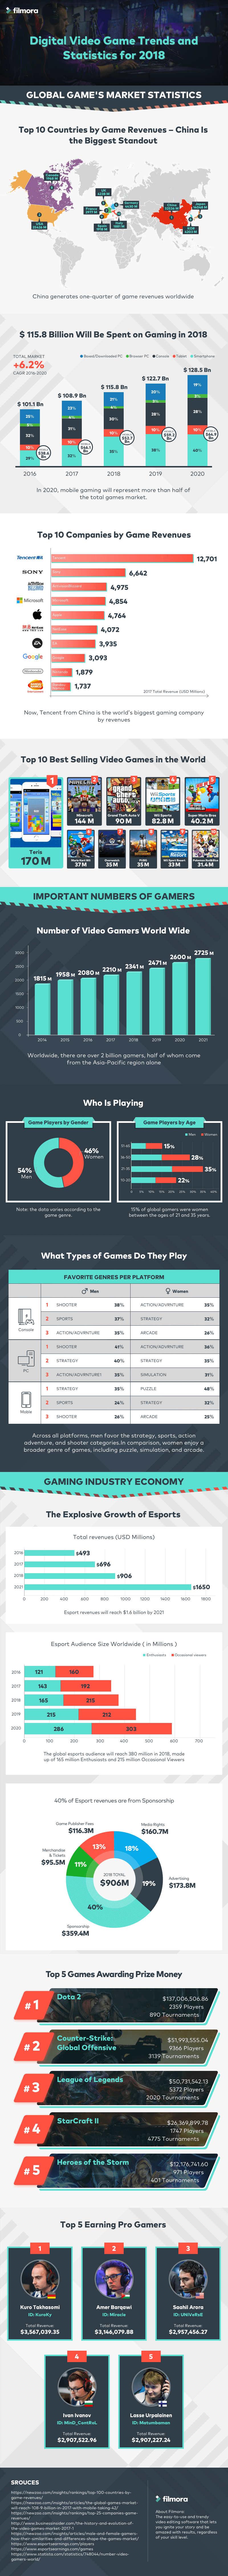 Video Game Trends and Stats 2018 Infographic